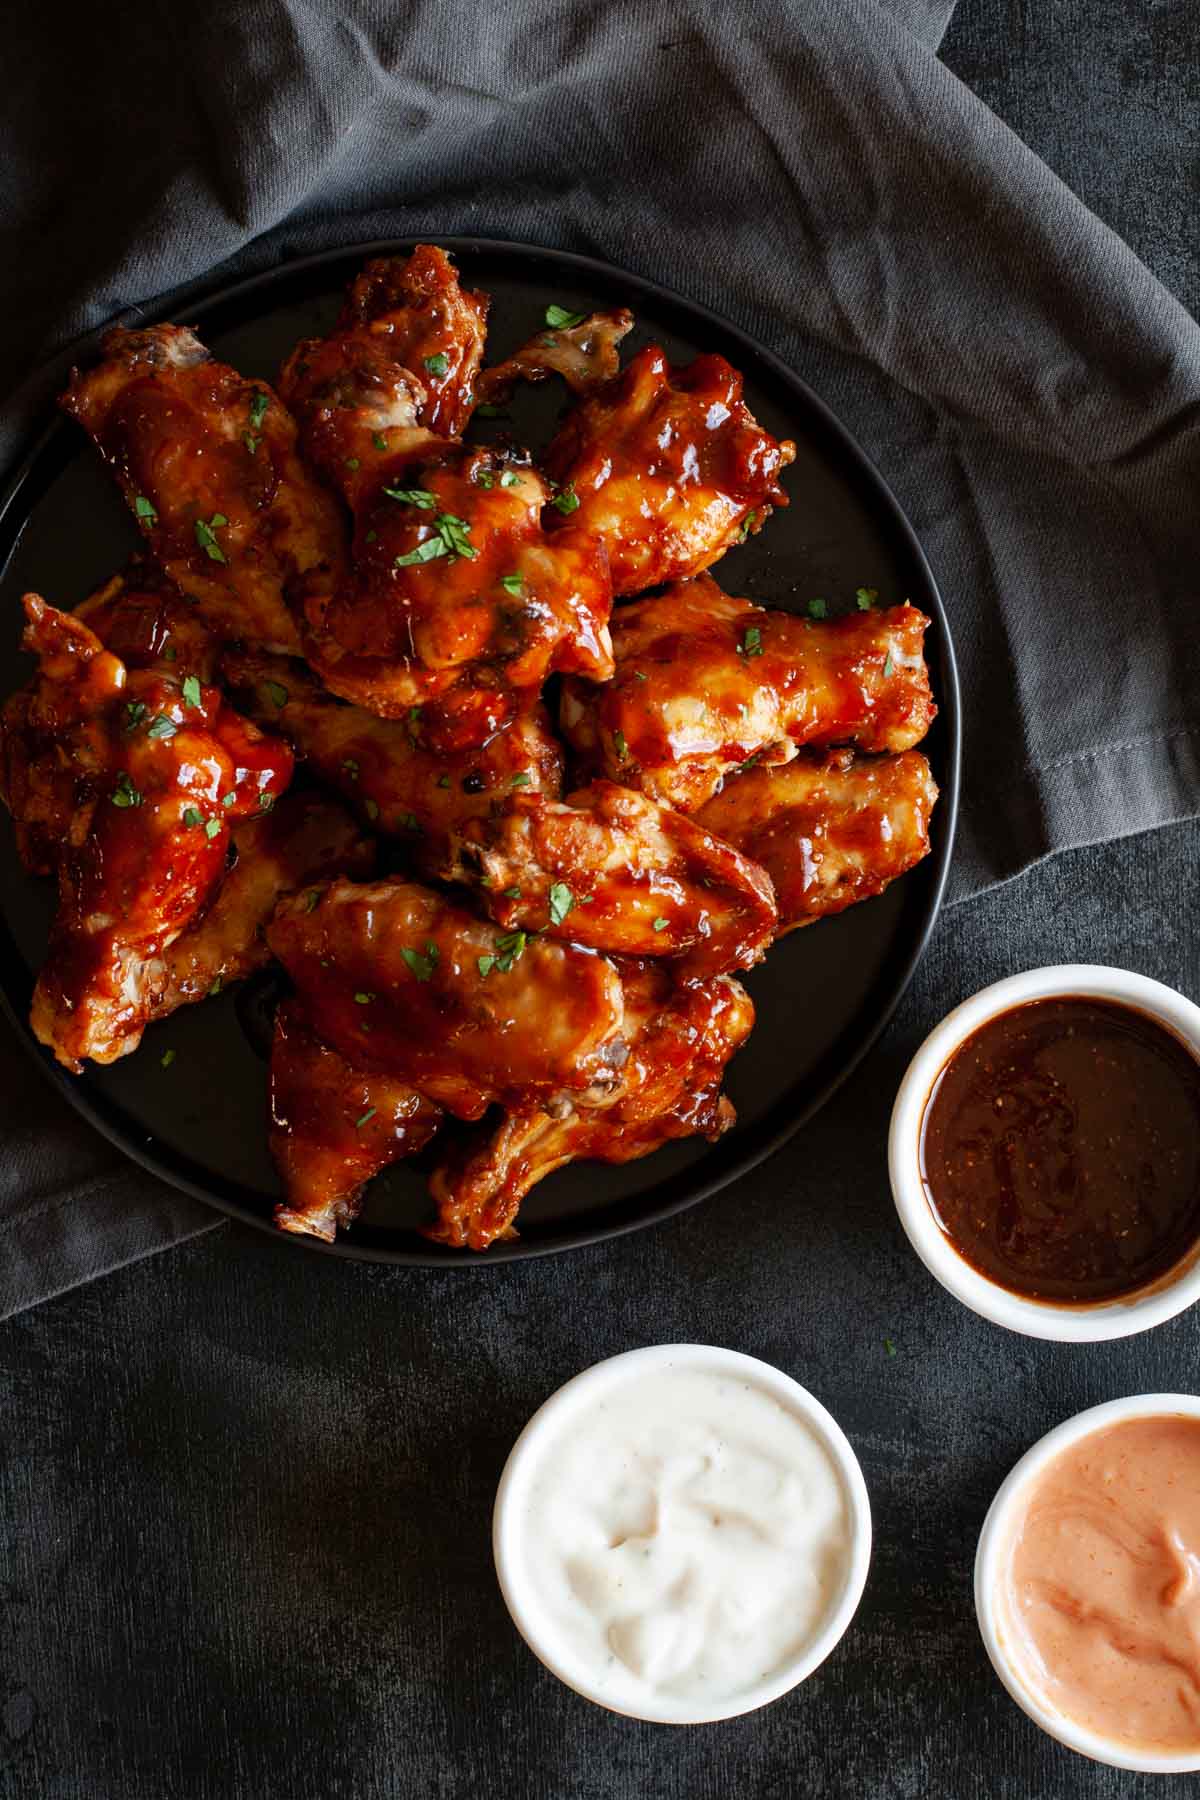 sweet and spicy chicken wings on a platter ready for serving, surrounded by multiple dipping sauces